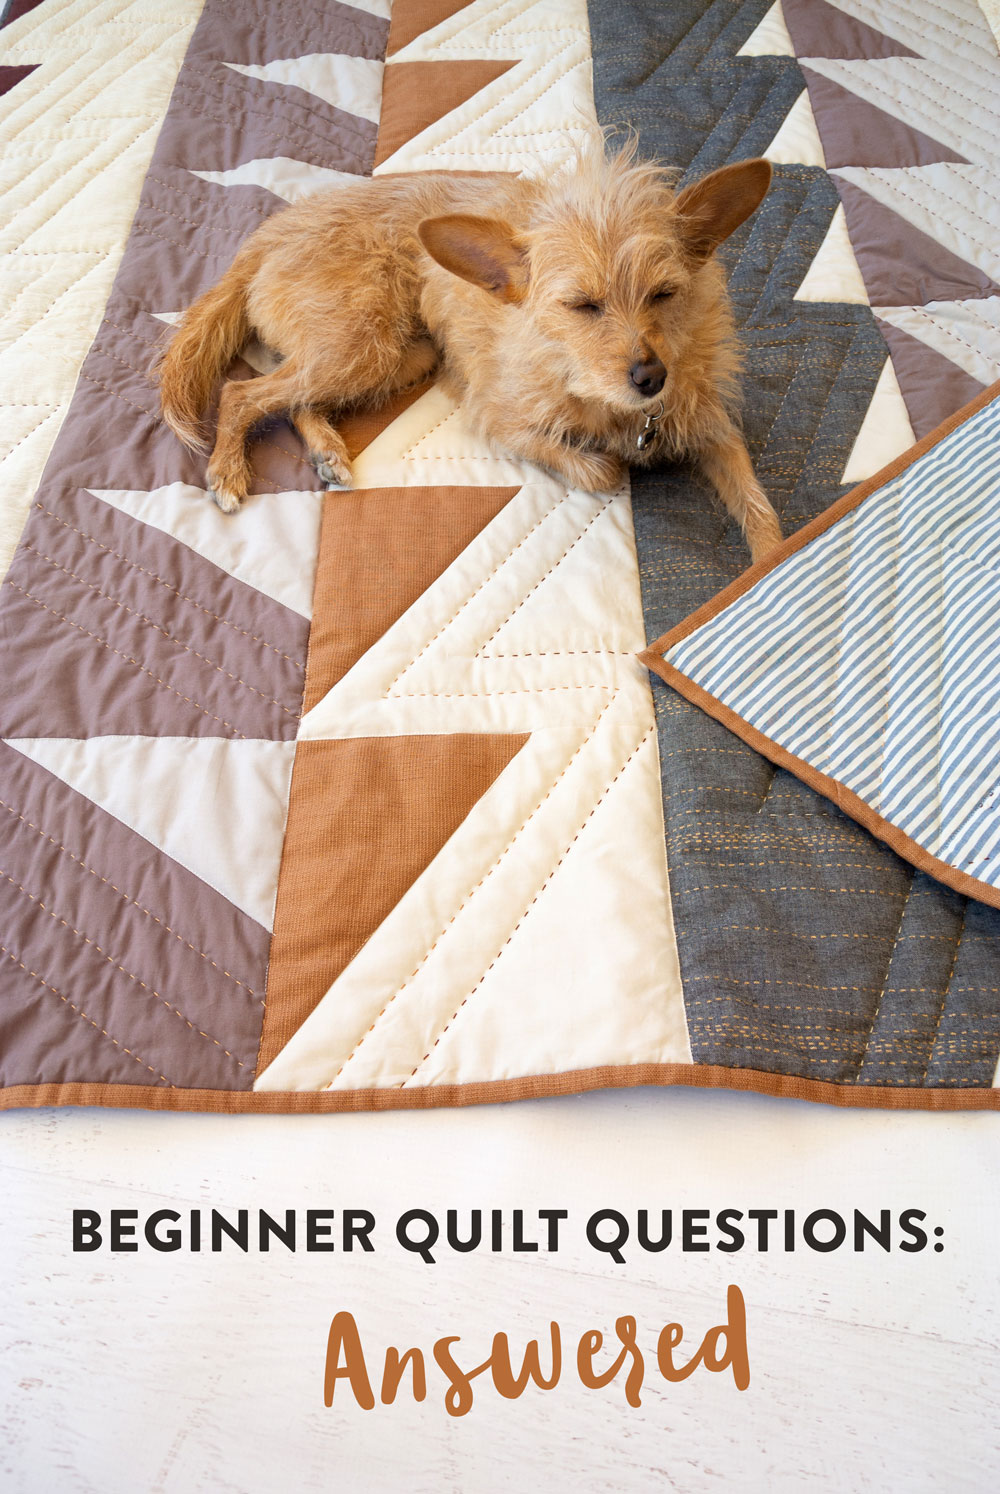 Beginner Quilting Questions are answered in the multi-part blog series! | Suzy Quilts https://suzyquilts.com/beginner-quilting-questions-answered-part-ii